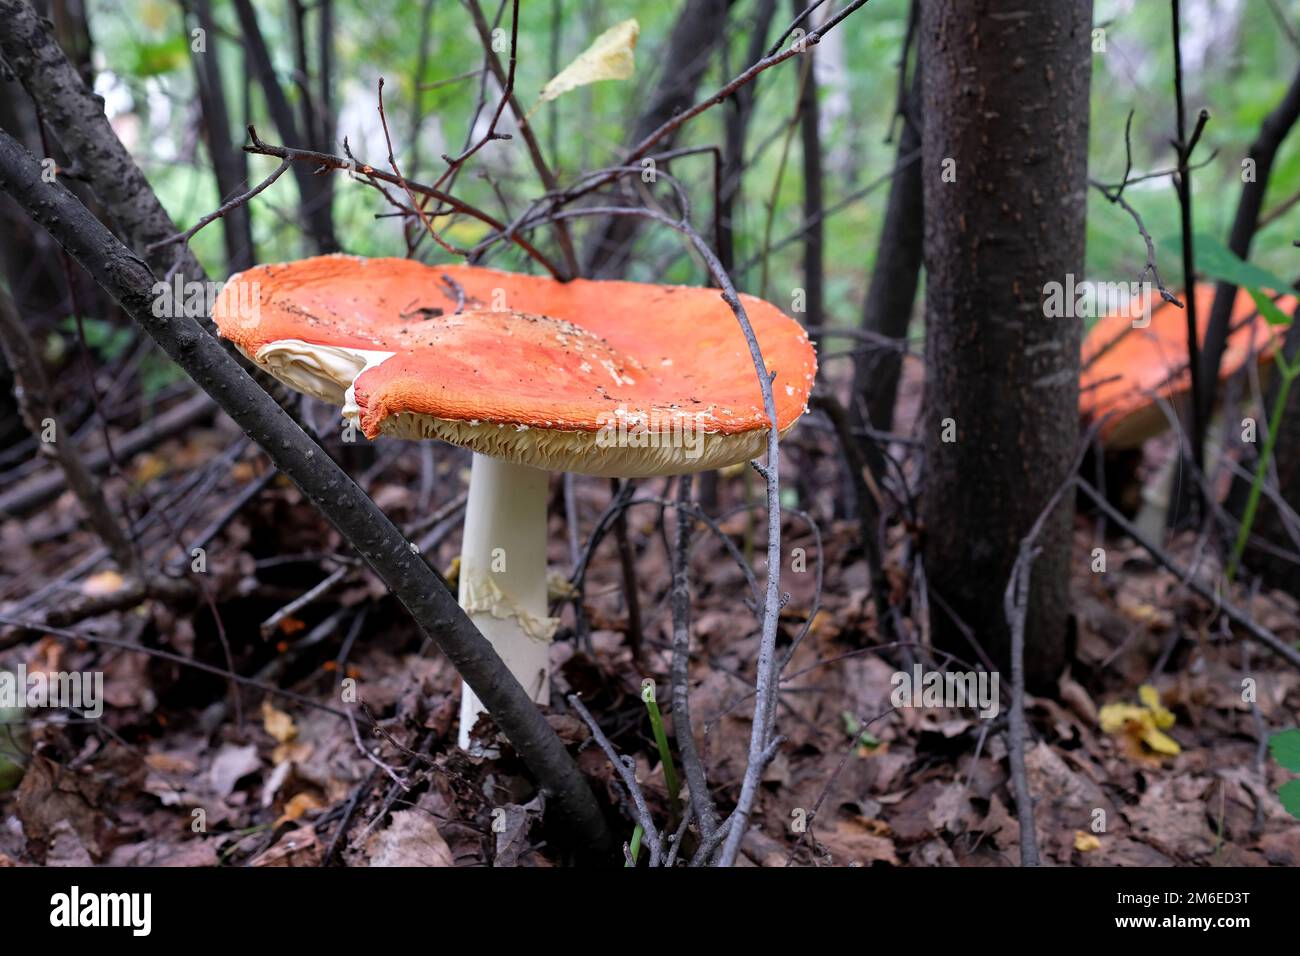 Amanita in the forest. A large poisonous mushroom in the forest. Branches, leaves, dark background a Stock Photo